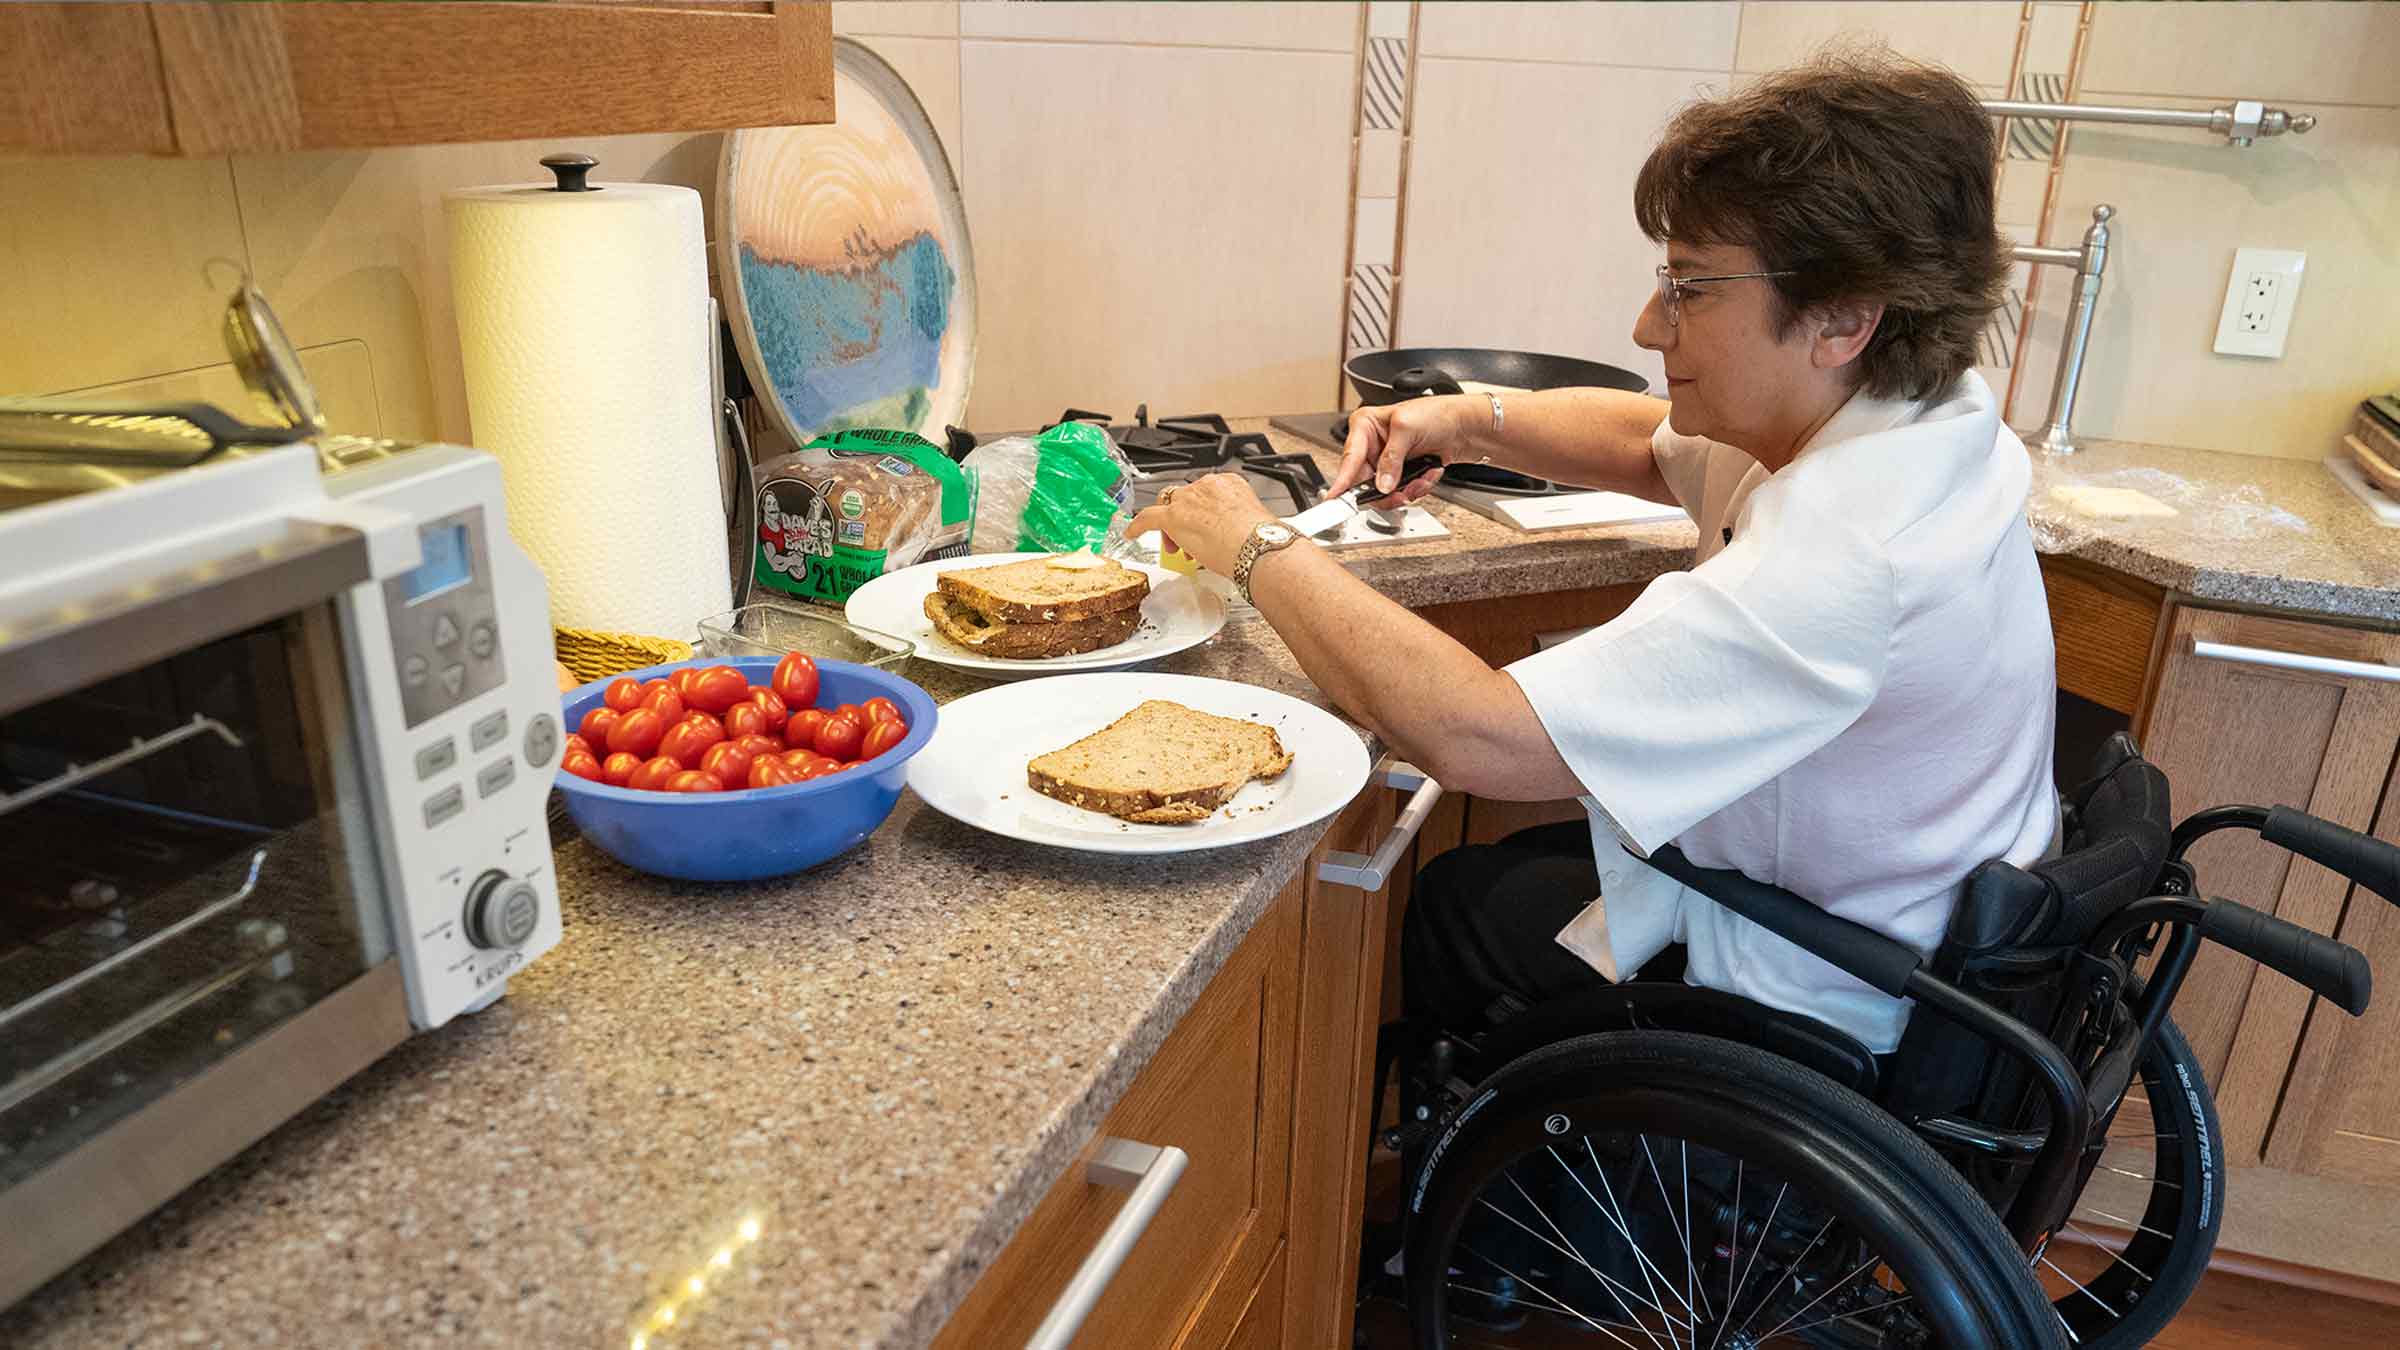 Rosemarie Rossetti sits in her wheelchair in the kitchen making food